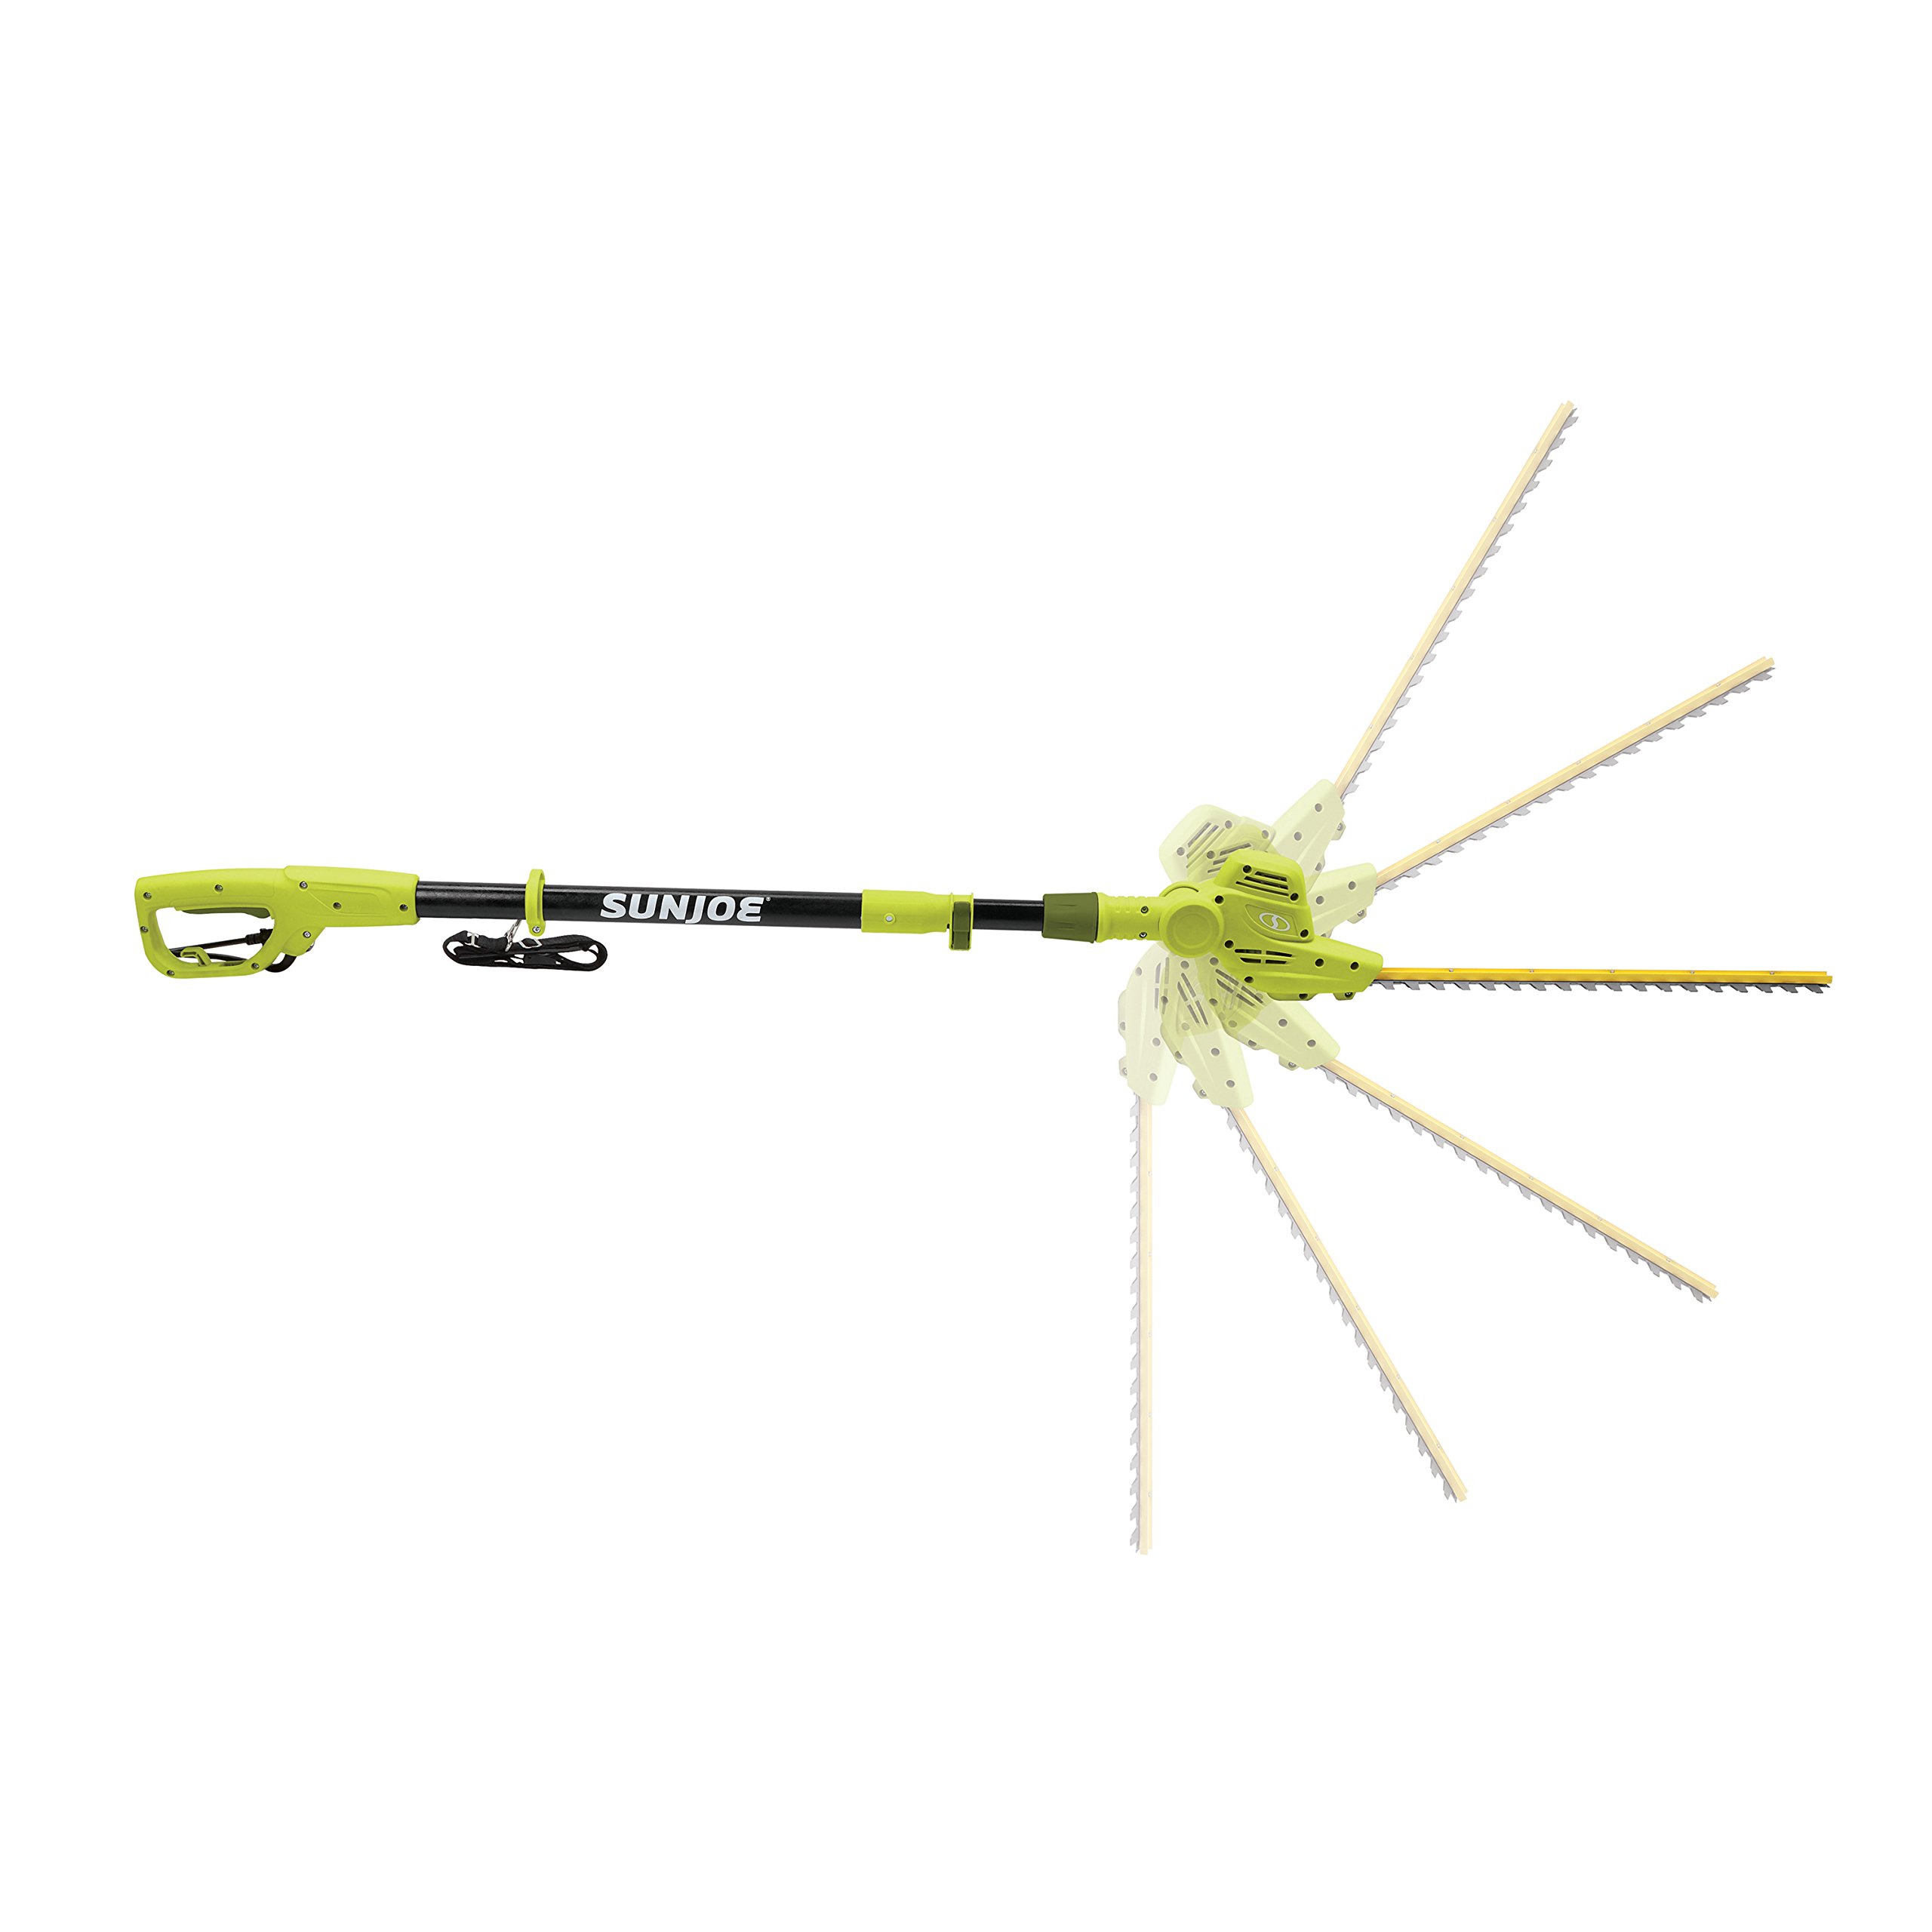 Sun Joe SJH901E 18-Inch Electric Telescoping Pole Hedge Trimmer $48.24 after 20% coupon